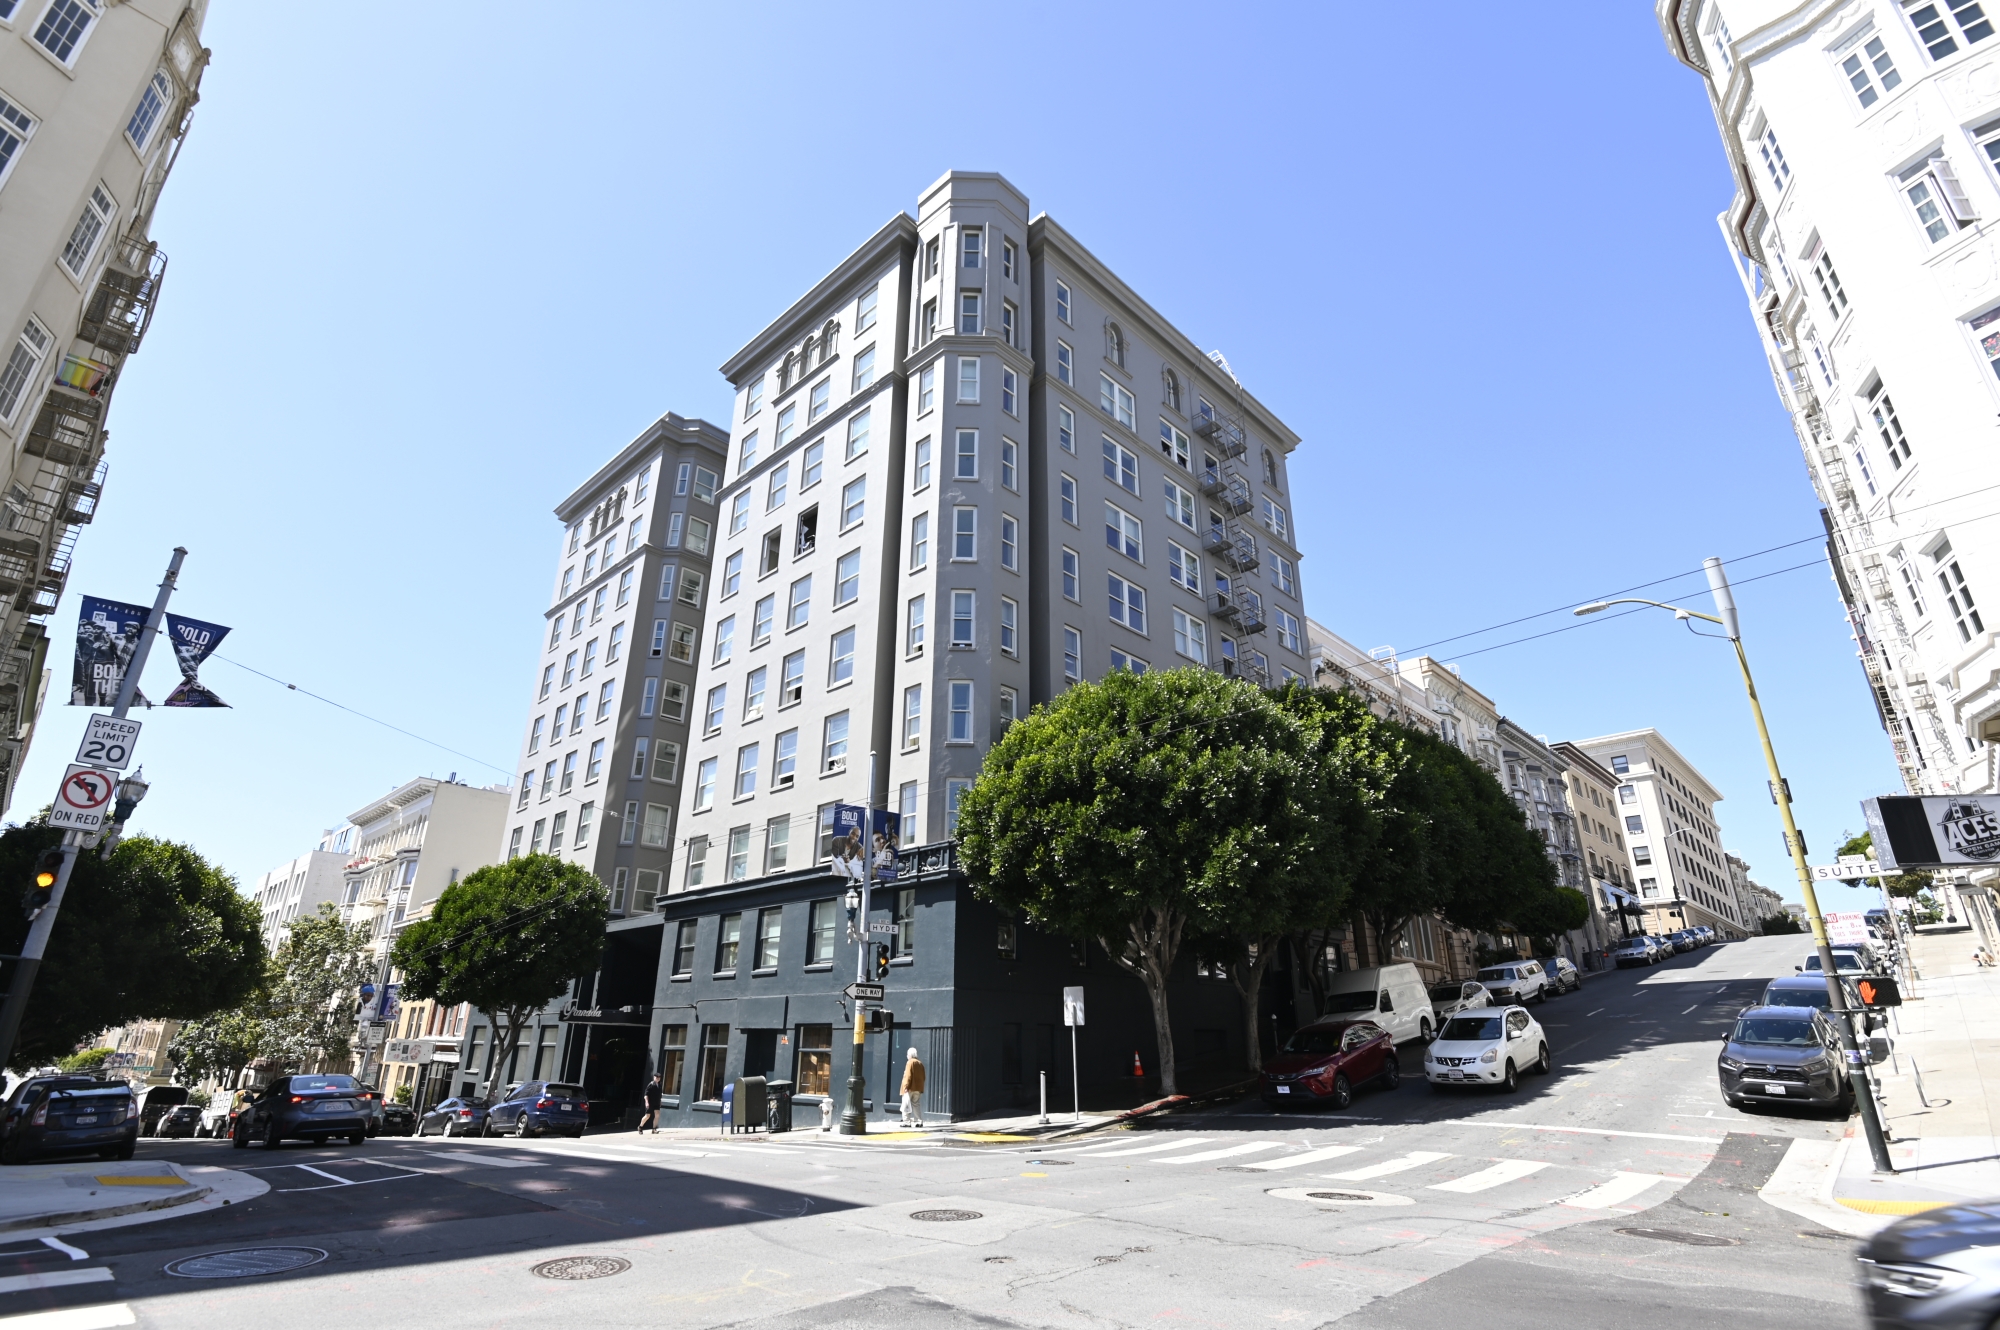 BBI Celebrates 1000 Sutter – and 200 Affordable Housing Units – to San Francisco